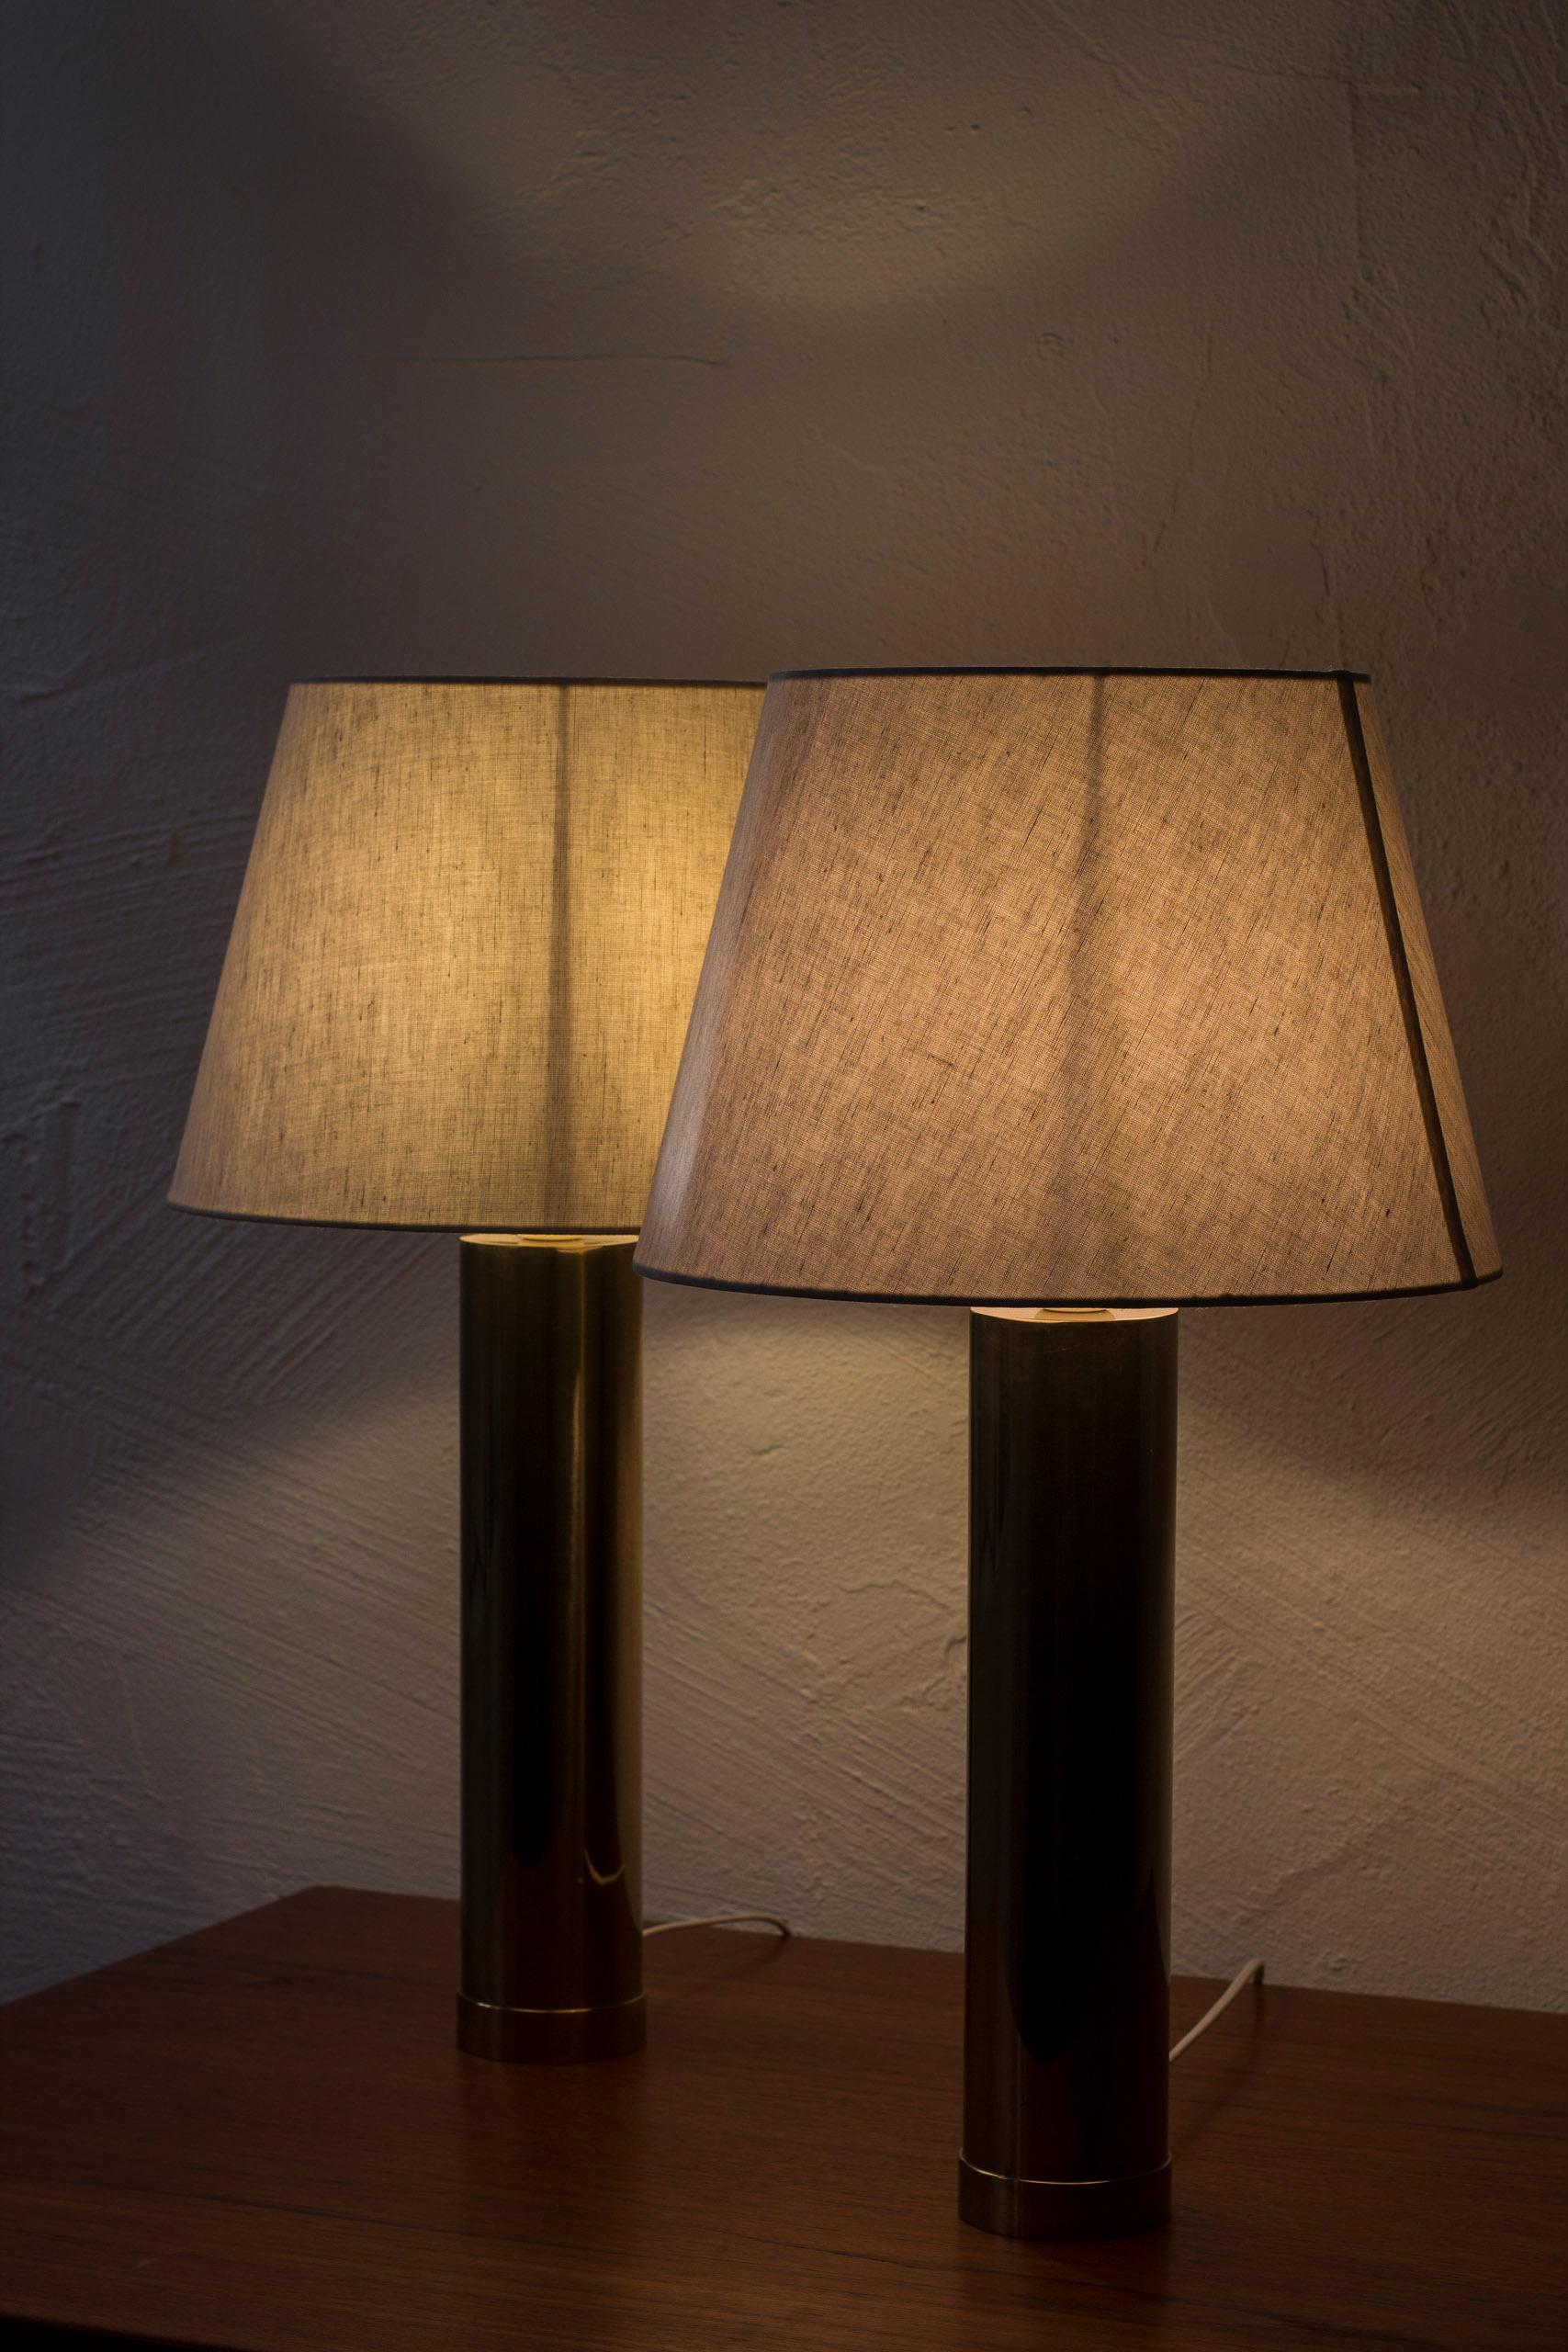 Swedish Pair of Brass Table Lamps by Bergboms, Sweden, 1960s, 4 Pcs Total For Sale